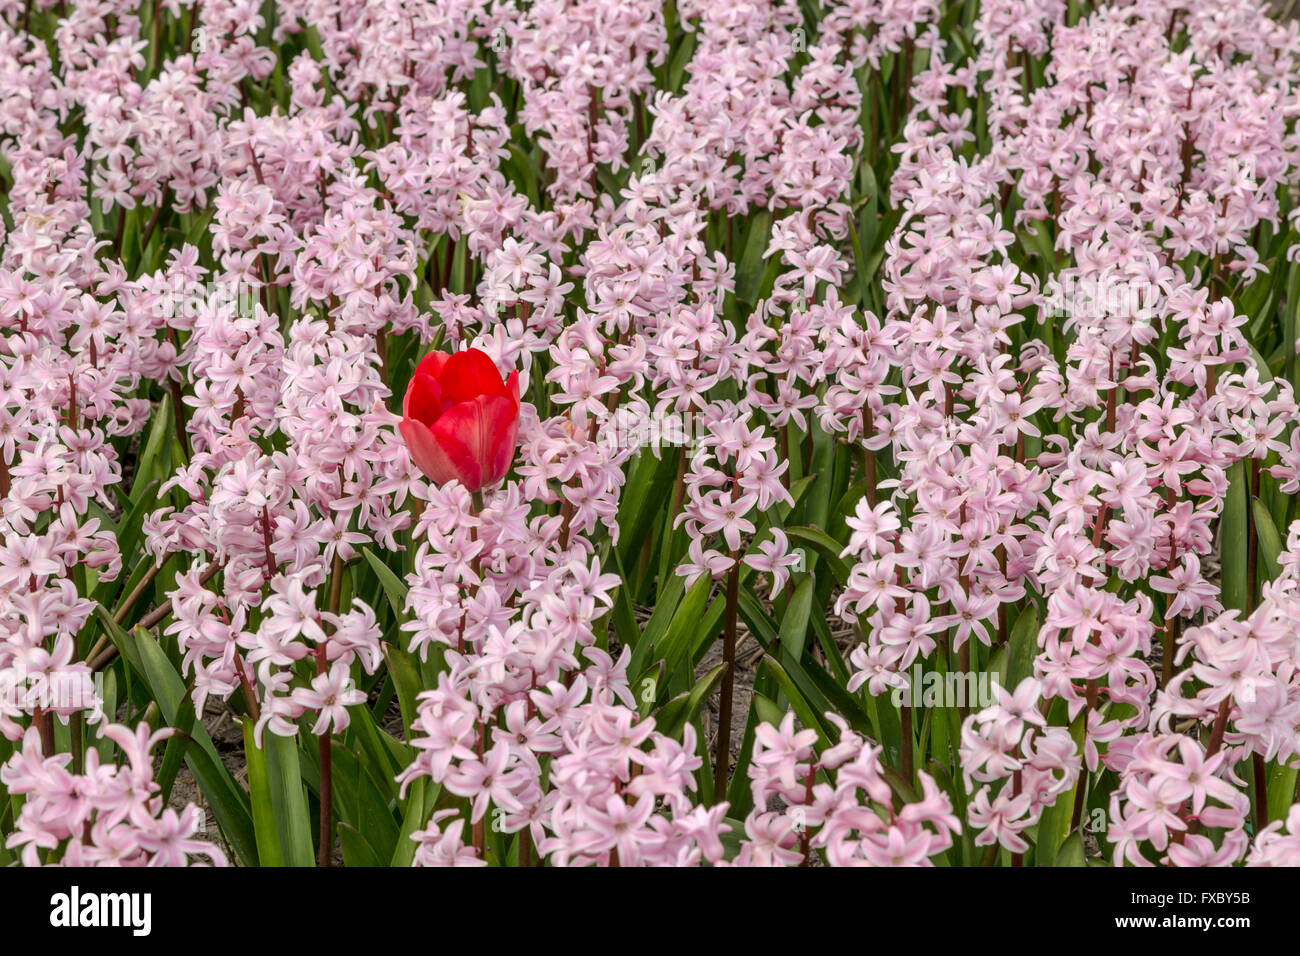 Spring time in he Netherlands: Odd one out- One red tulip flowering between pink hyacinths, Hillegom, South Holland. Stock Photo